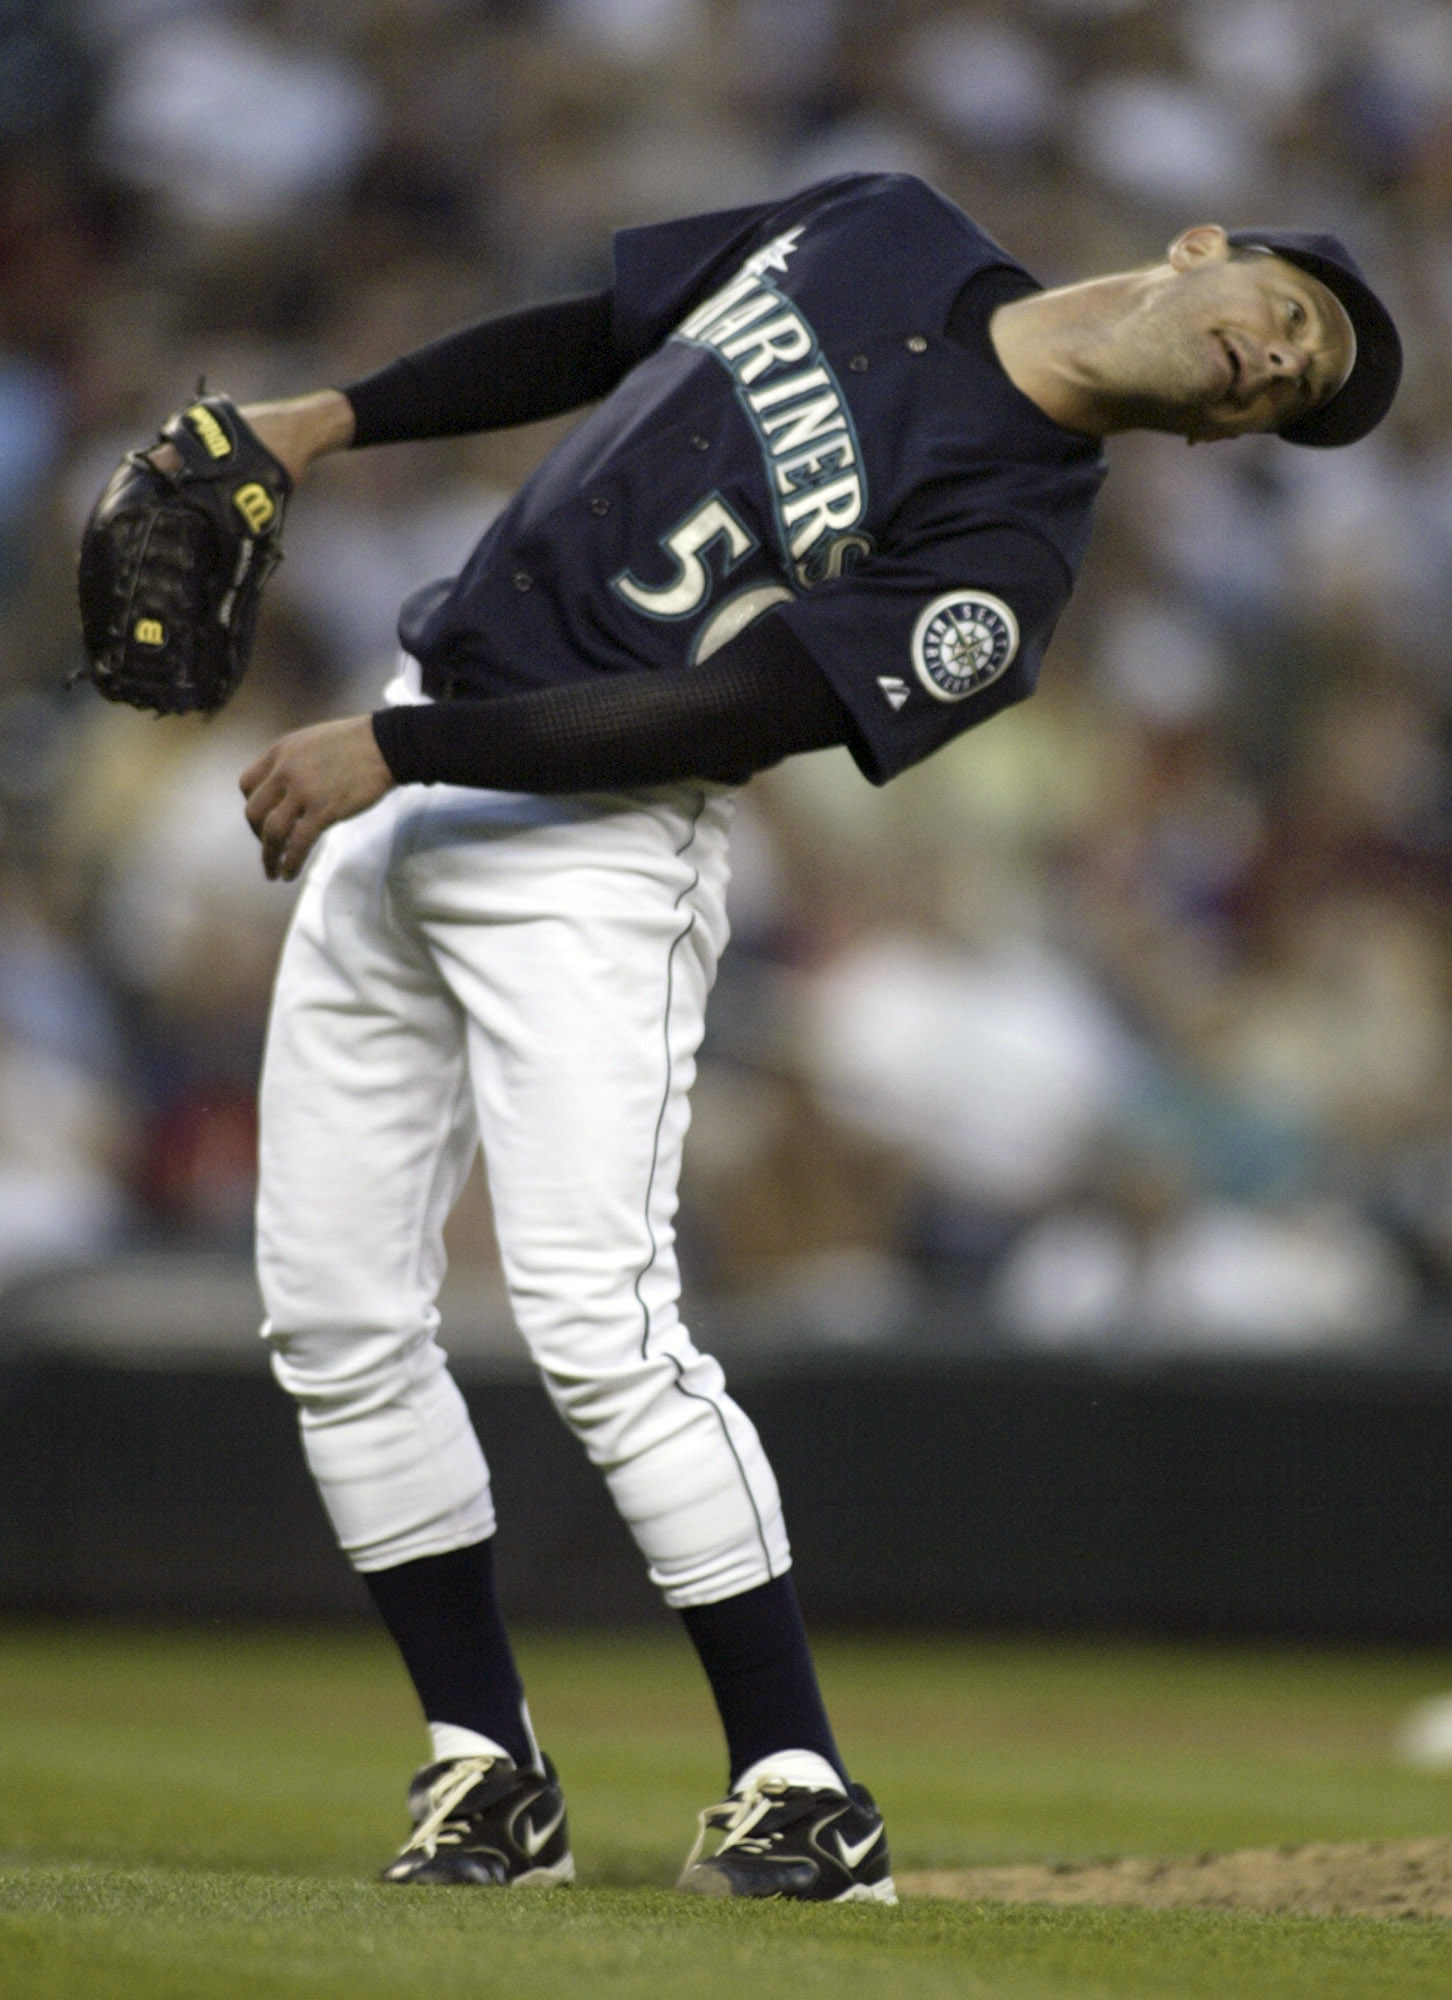 Seattle Mariners' Jamie Moyer uses a little body english to help right fielder Ichiro Suzuki catch Colorado Rockies' Ryan Spilborgh's pop fly in the ninth inning in Seattle on June 30, 2006. The Rockies beat the Mariners 2-0. ©2006. Jim Bryant Photo. All Rights Reserved.